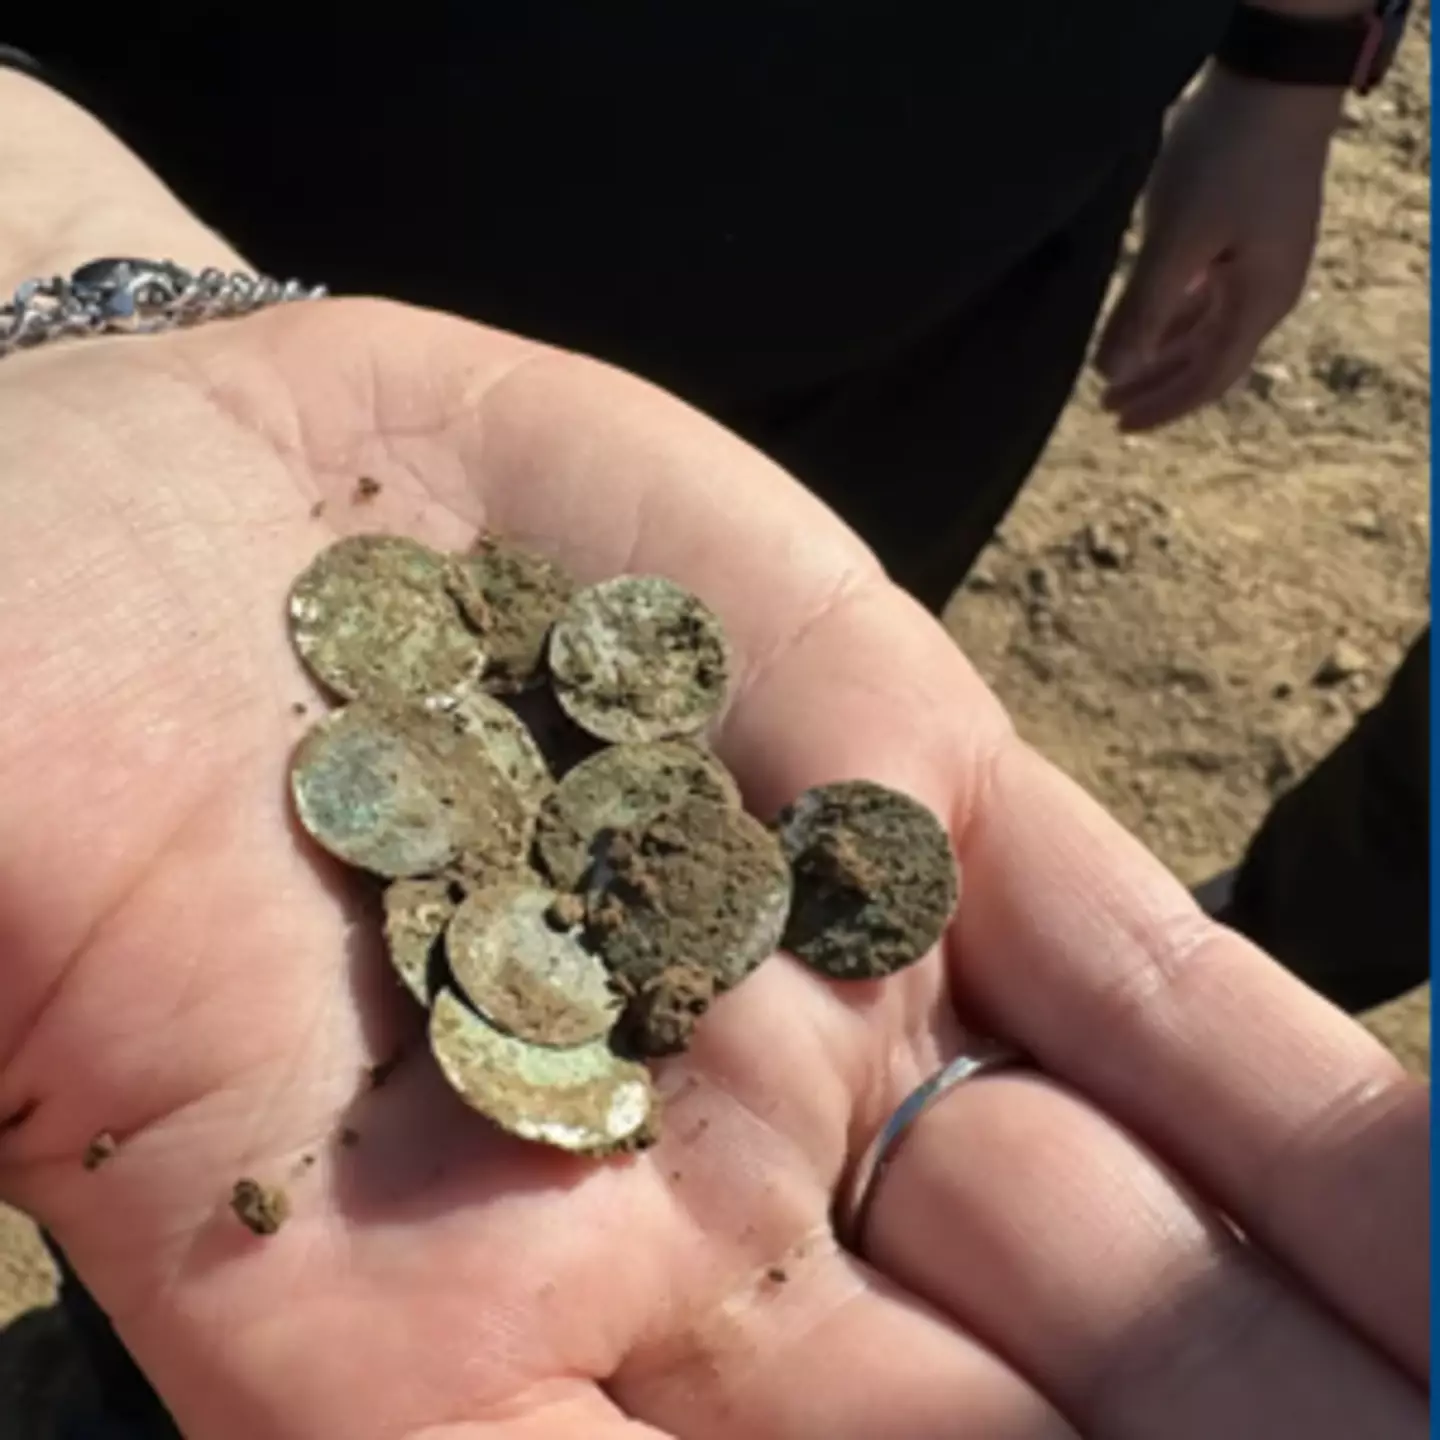 Woman accidentally discovers 'unimaginable' 900-year-old treasure whilst on a casual walk